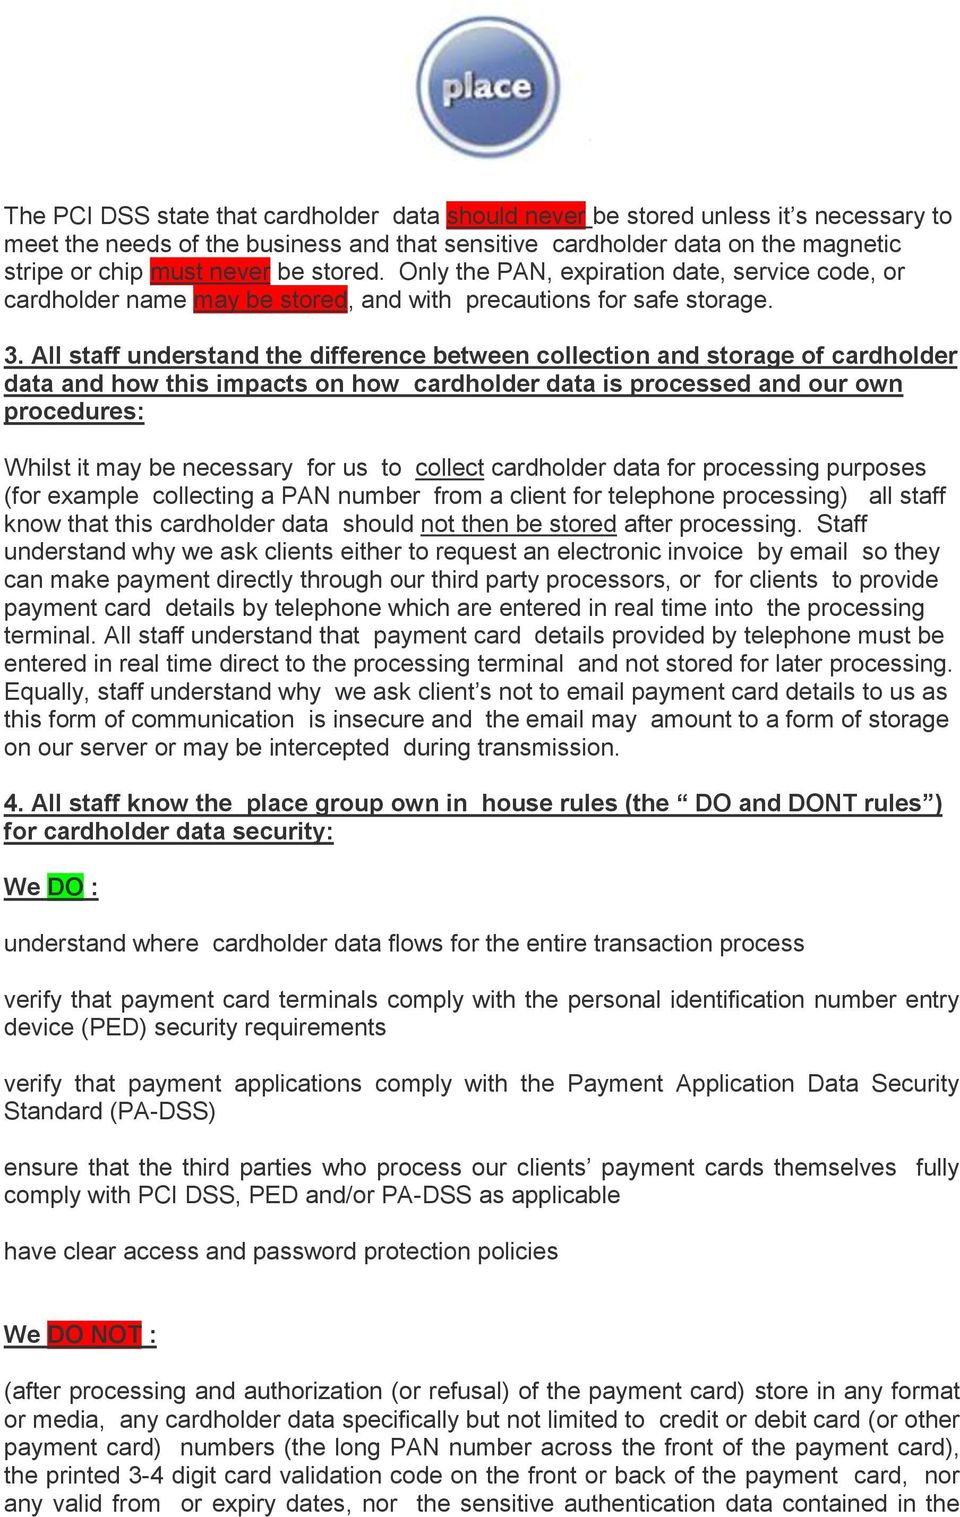 All staff understand the difference between collection and storage of cardholder data and how this impacts on how cardholder data is processed and our own procedures: Whilst it may be necessary for